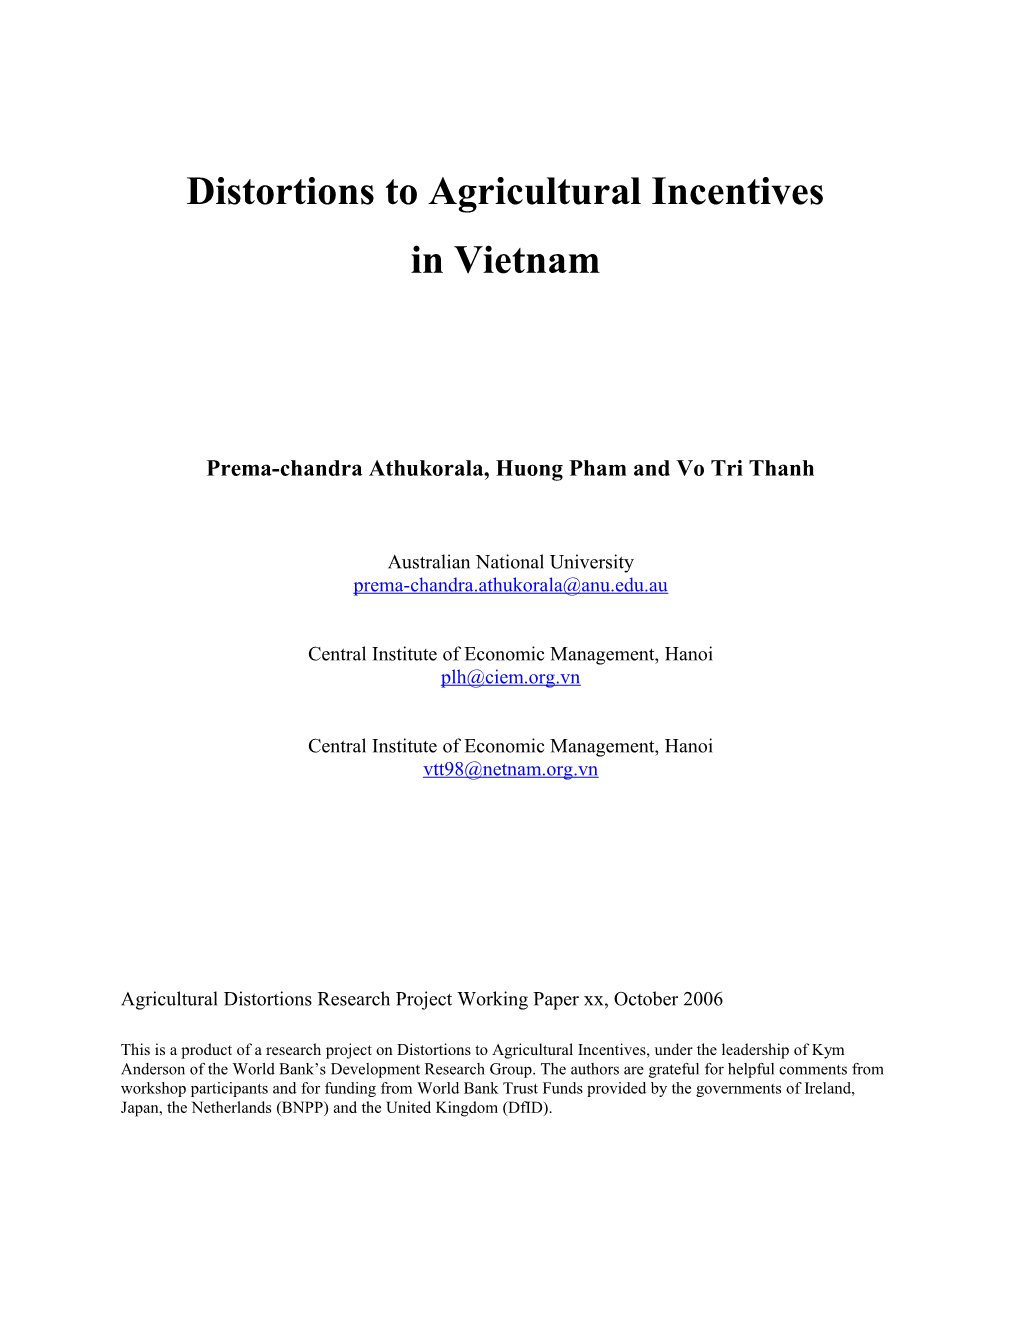 Distortions to Agricultural Incentives: Ri Lanka Chapter